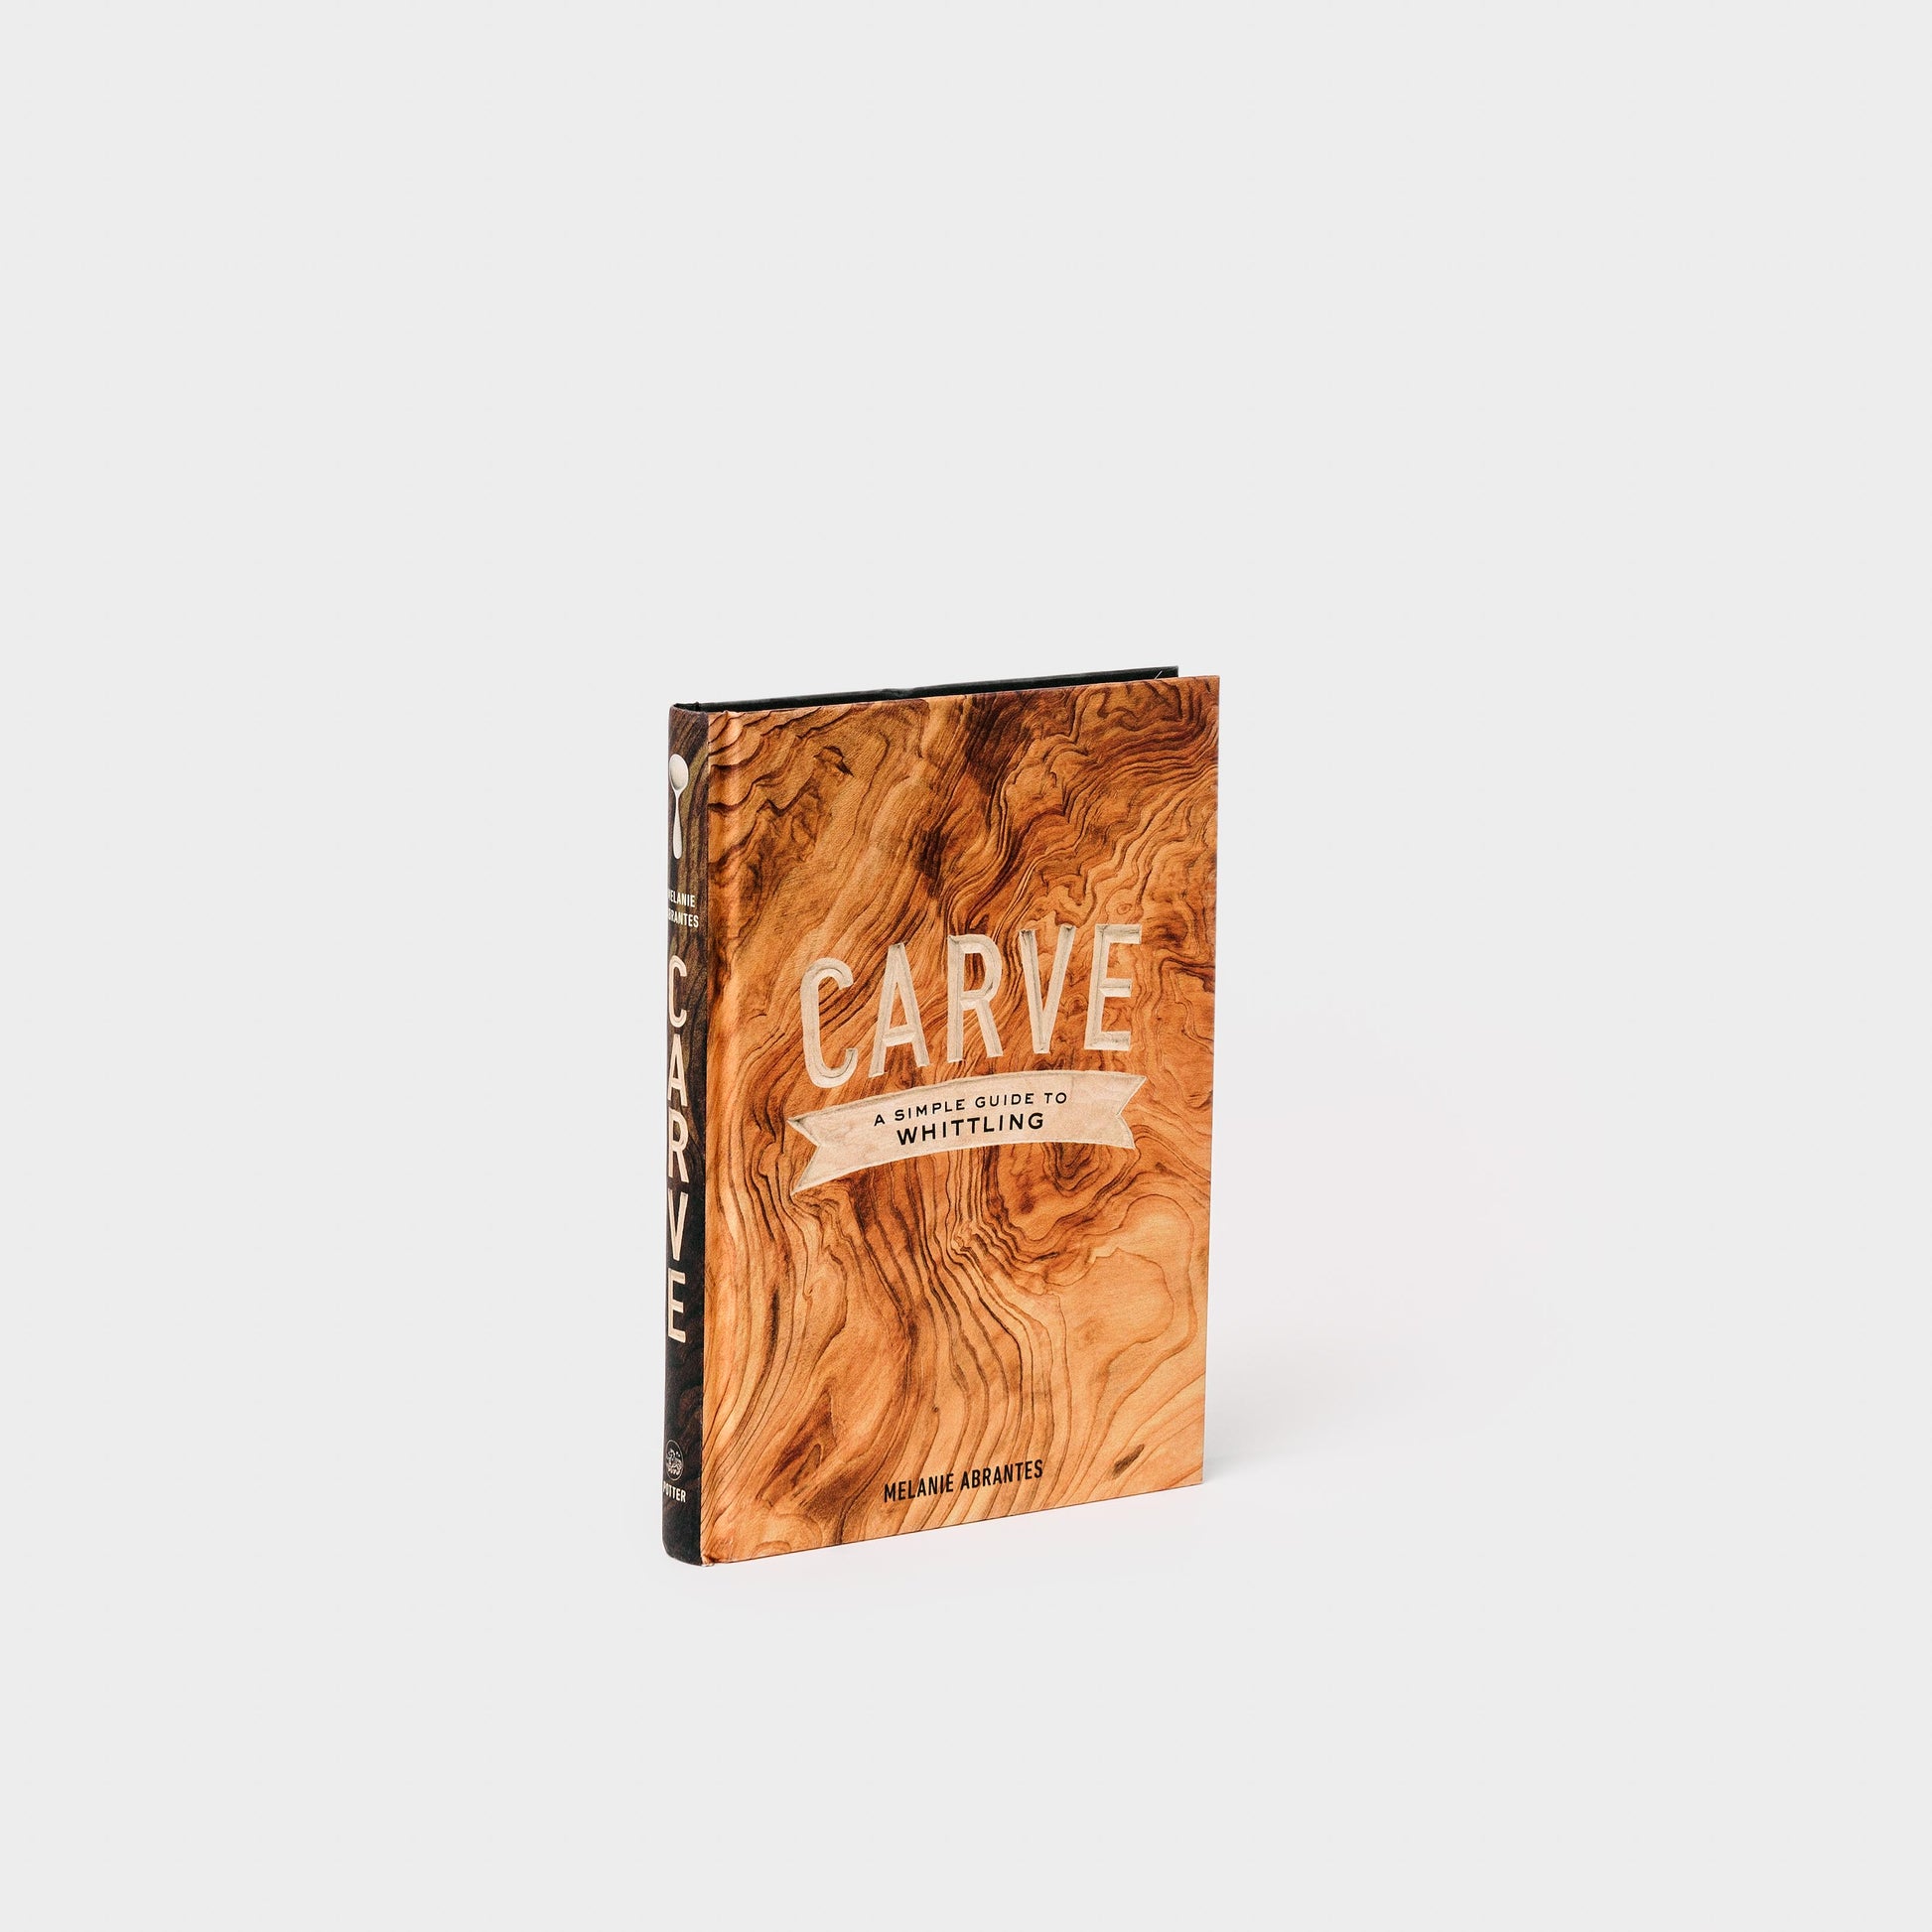 The "Carve" Book included in the Bundle | Melanie Abrantes Designs